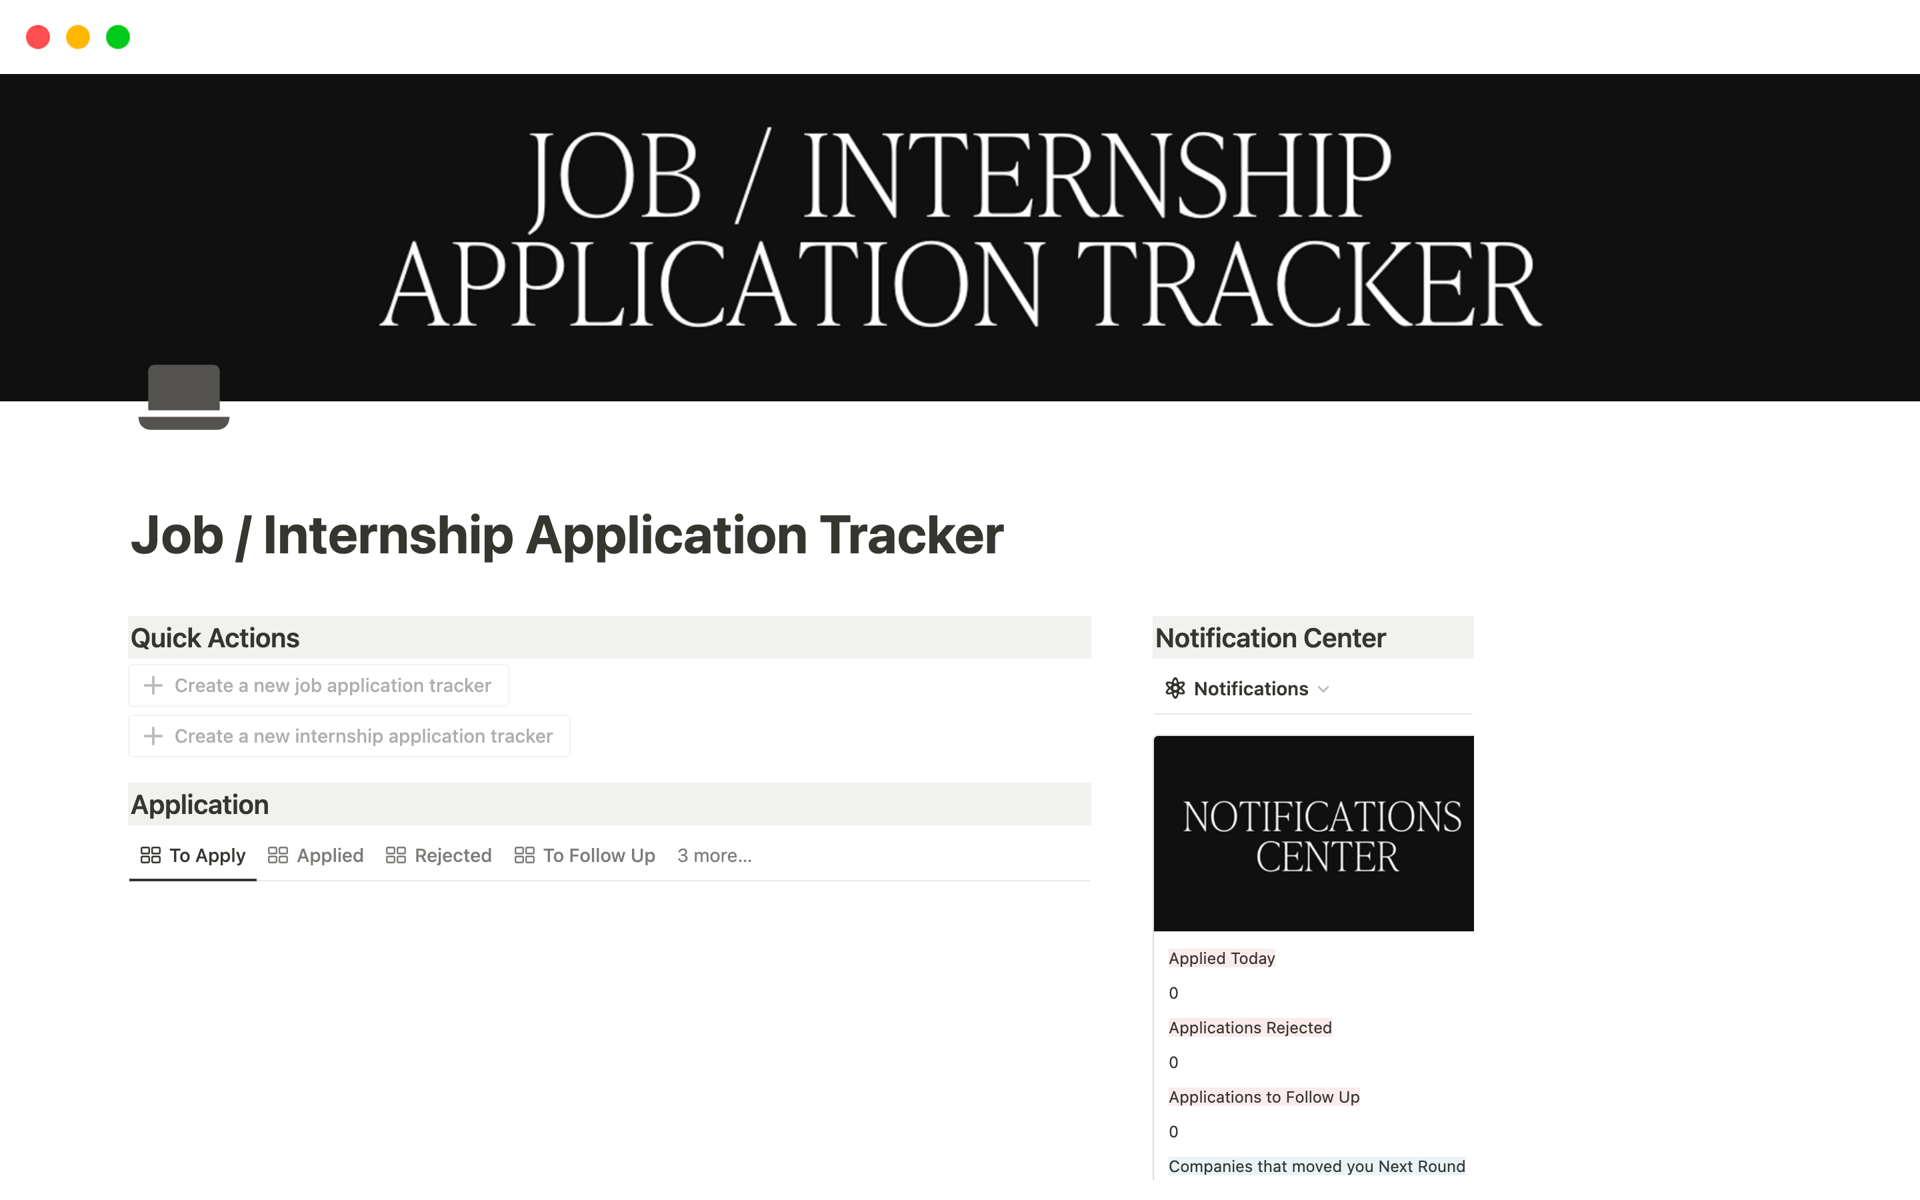 Track your job and internship applications seamlessly with our Application Tracker.